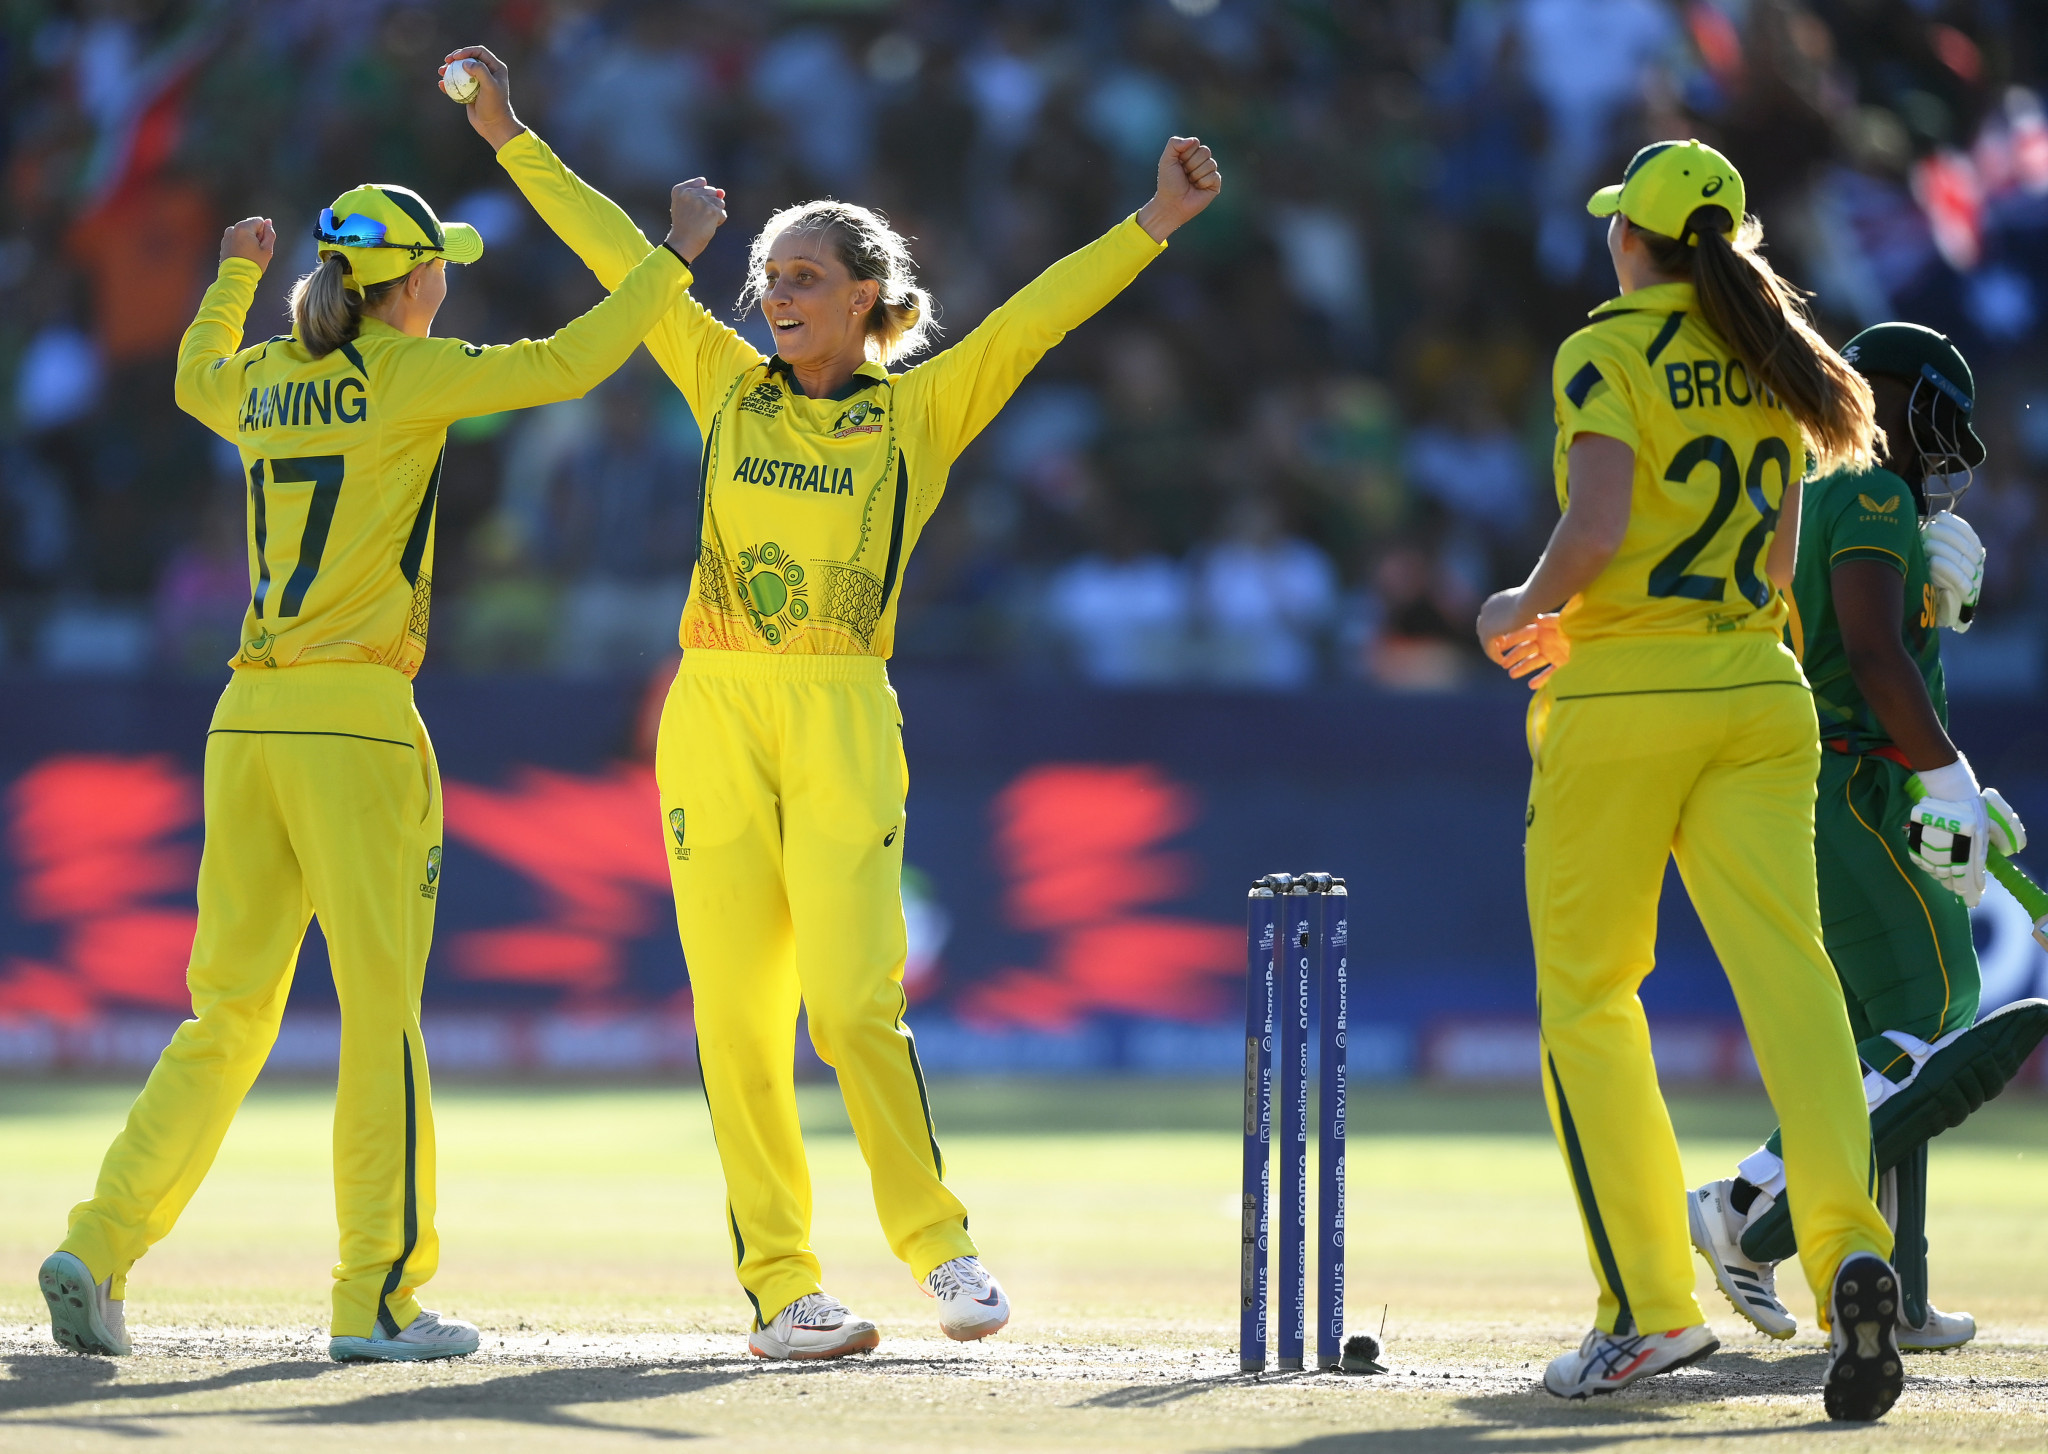 Four Australians named in ICC Women's T20 World Cup team of the tournament